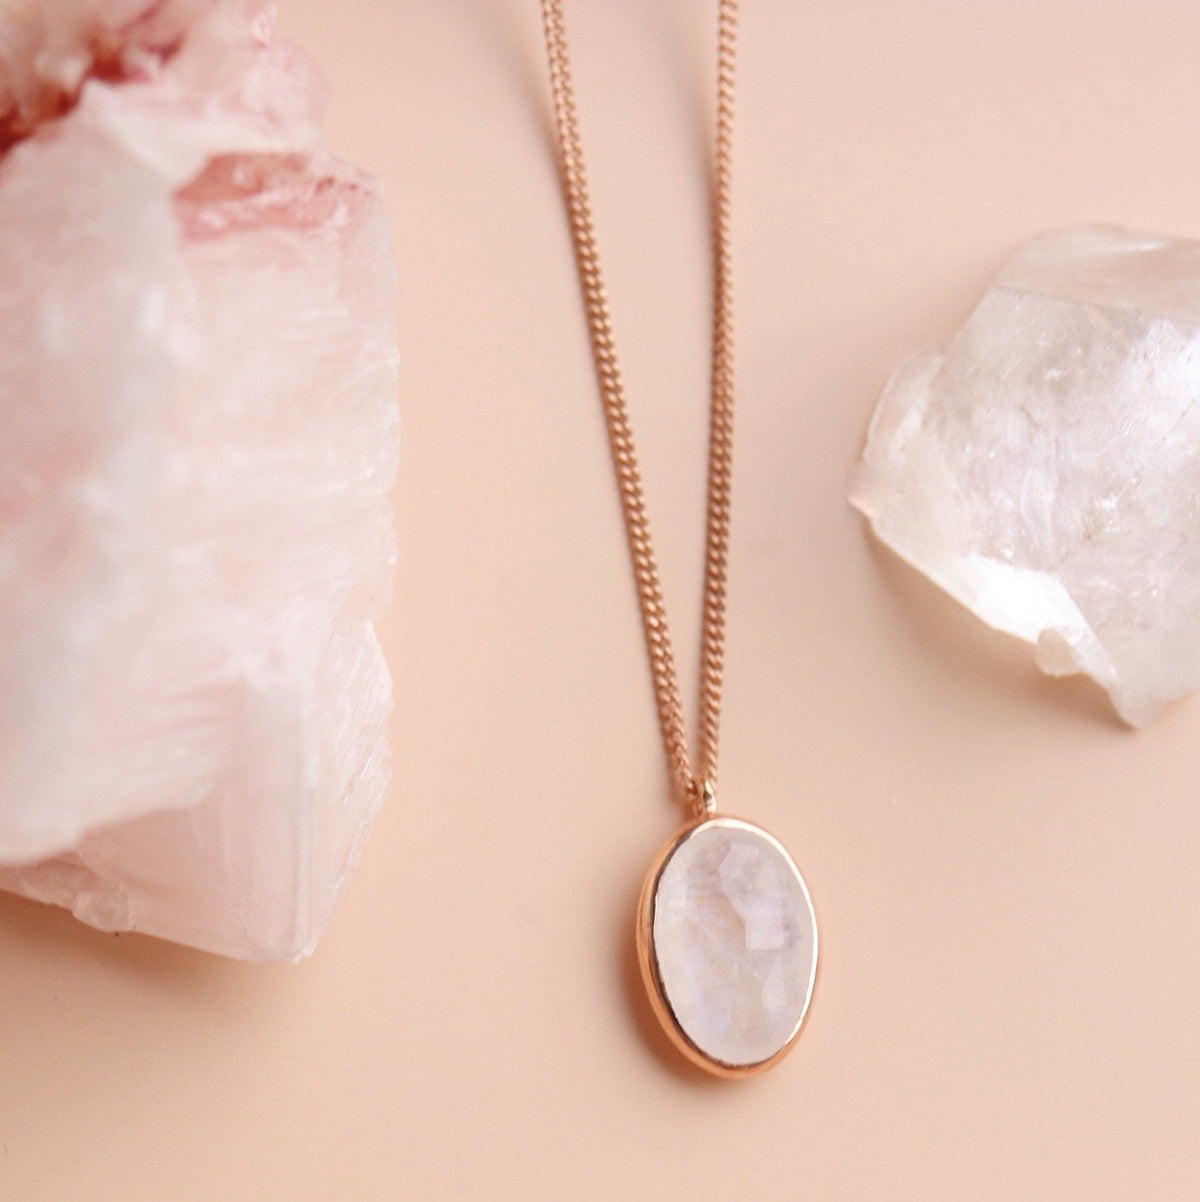 PROTECT PENDANT NECKLACE - RAINBOW MOONSTONE &amp; ROSE GOLD - SO PRETTY CARA COTTER